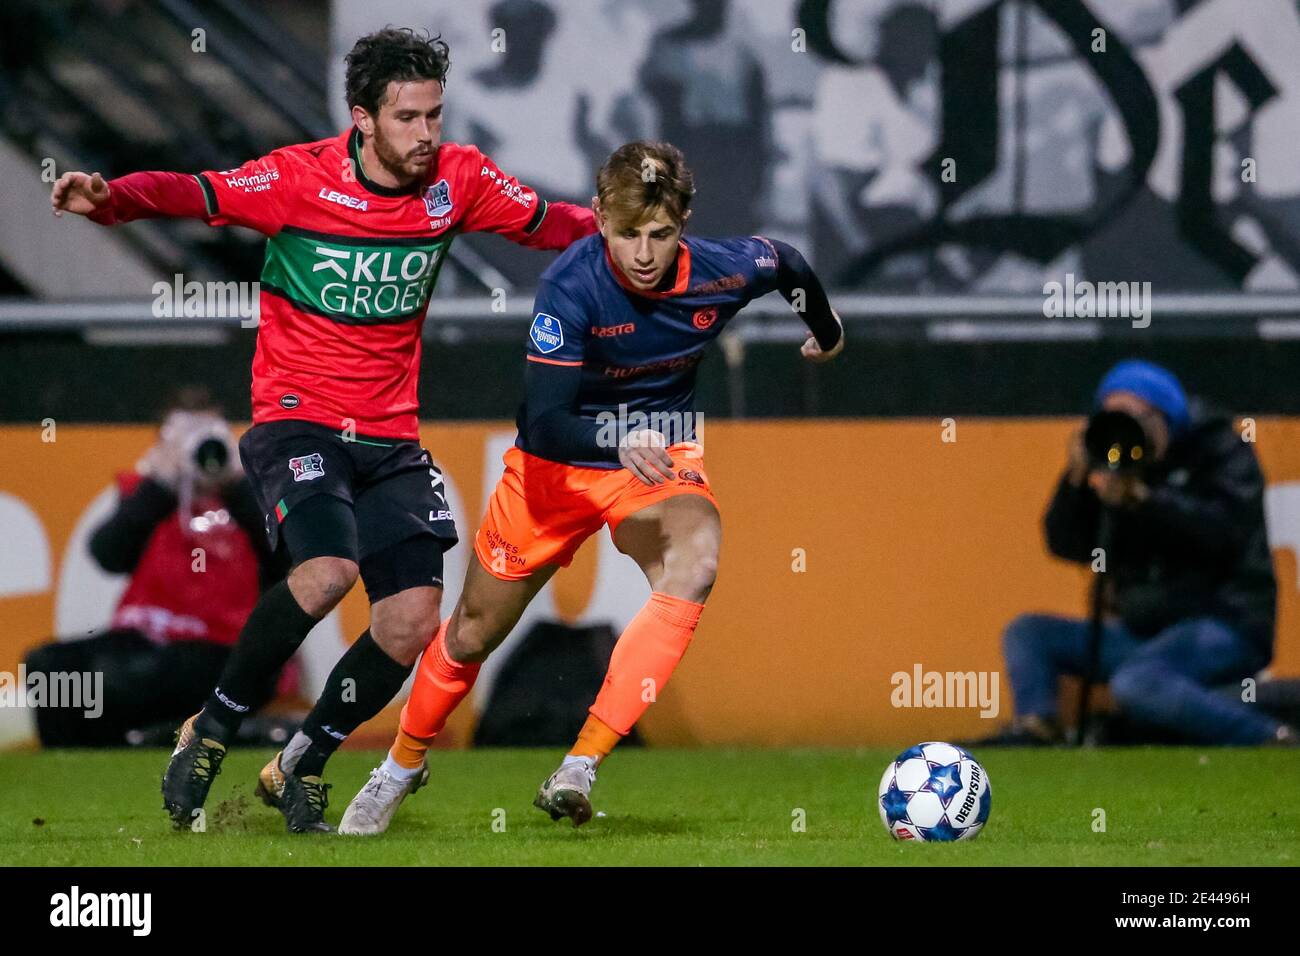 NIJMEGEN, NETHERLANDS - JANUARY 21: (L-R): Jordy Bruijn of NEC, Lazaros Rota of Fortuna Sittard during the Dutch KNVB Cup match between NEC and Fortun Stock Photo